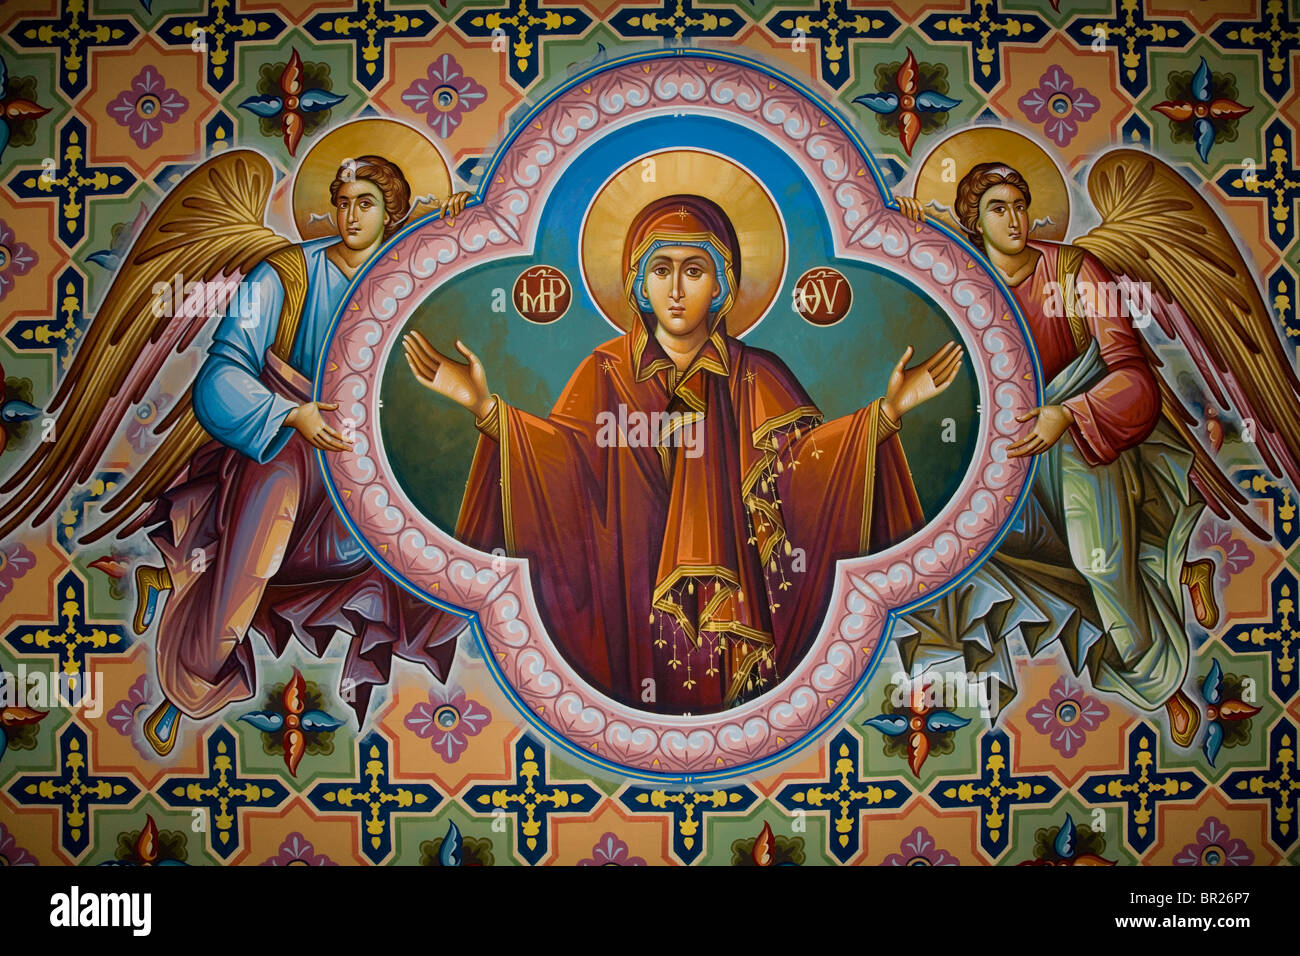 Virgin Mother Mary open arms fresco Greek Church wall two angels supporting frame colourful decoration Christianity old church Stock Photo